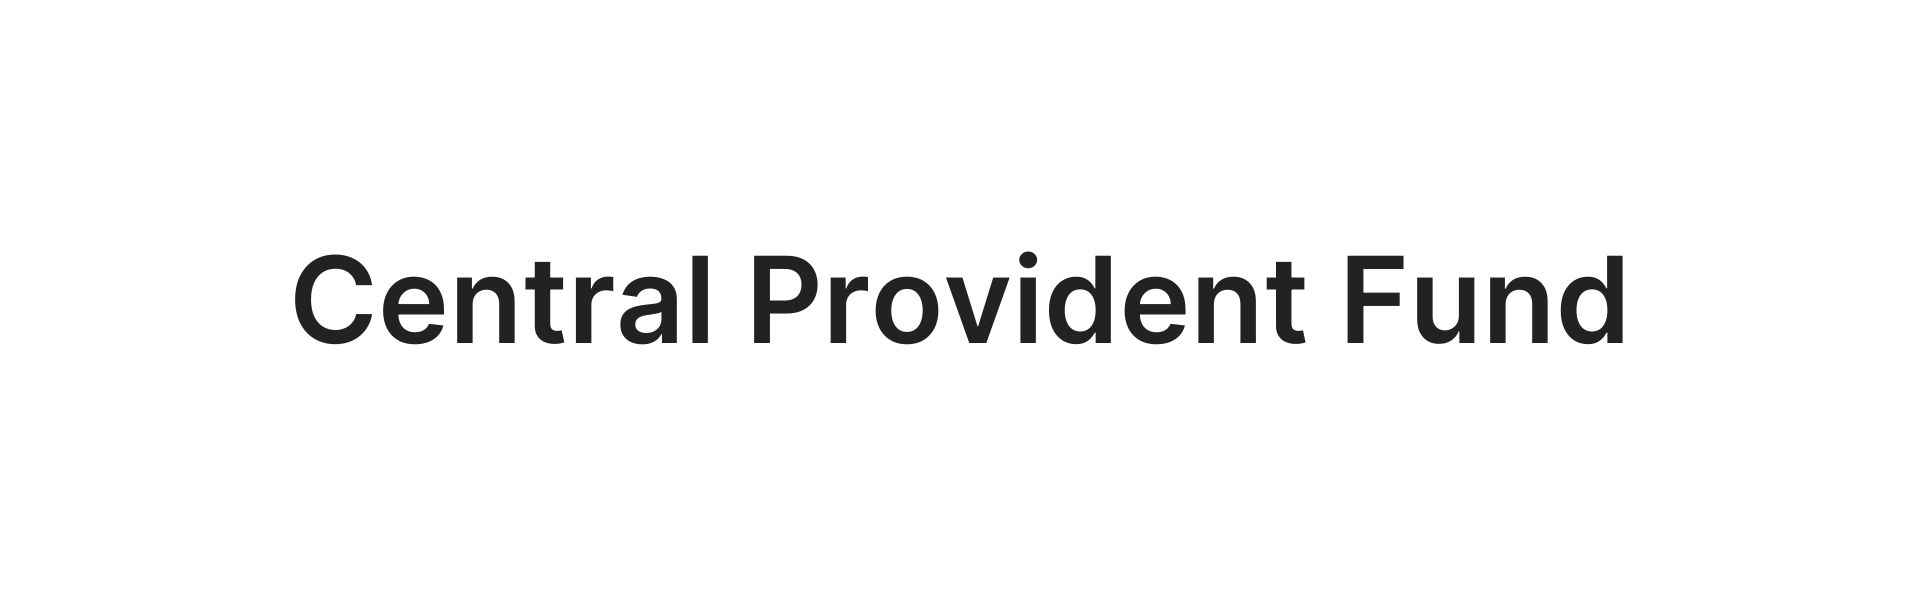 Central Provident Fund